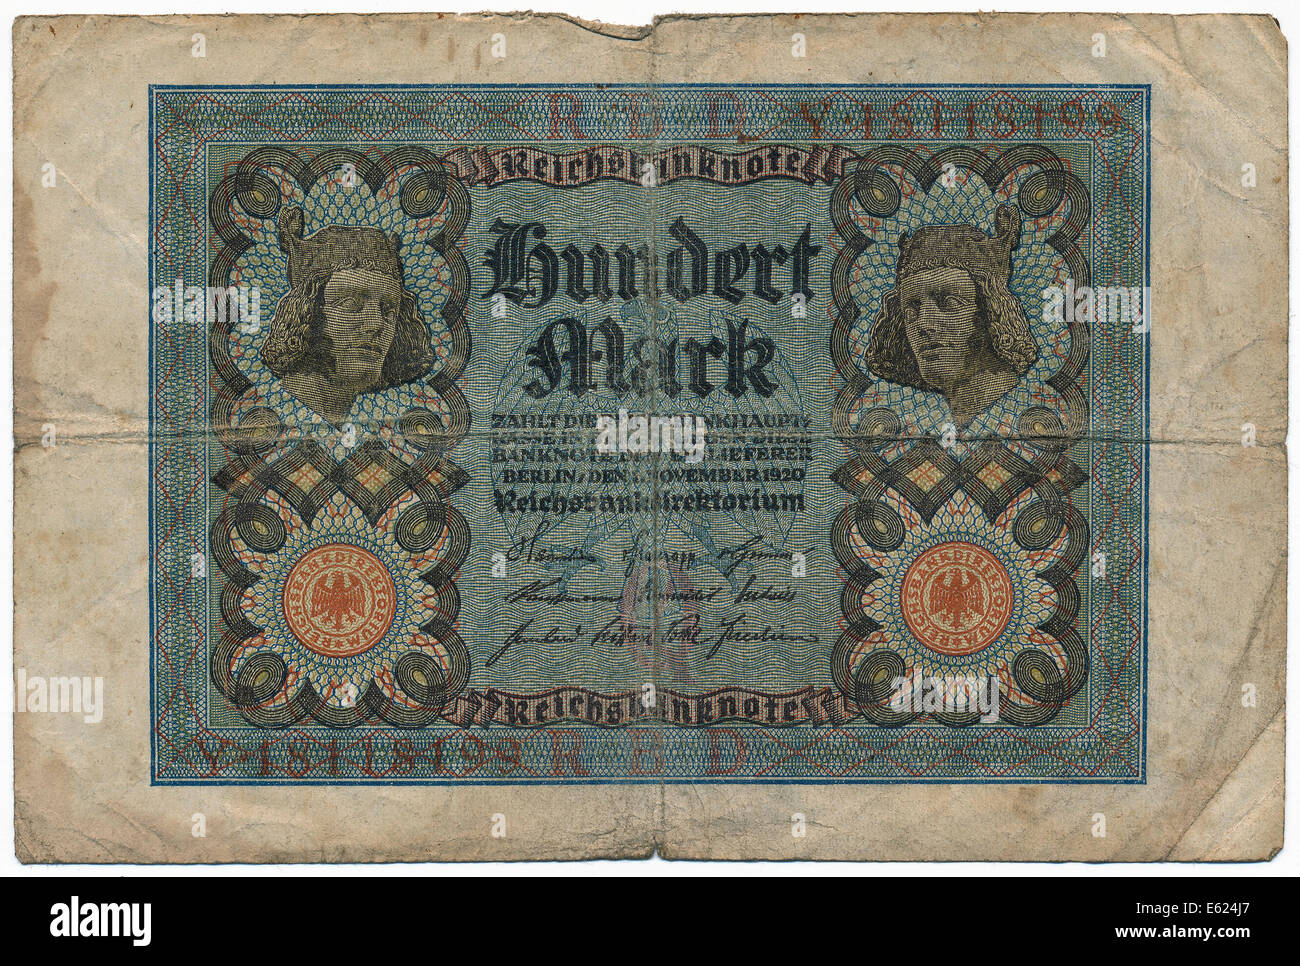 Old banknote, 100 marks, front, German Reichsbanknote, 1922 Stock Photo